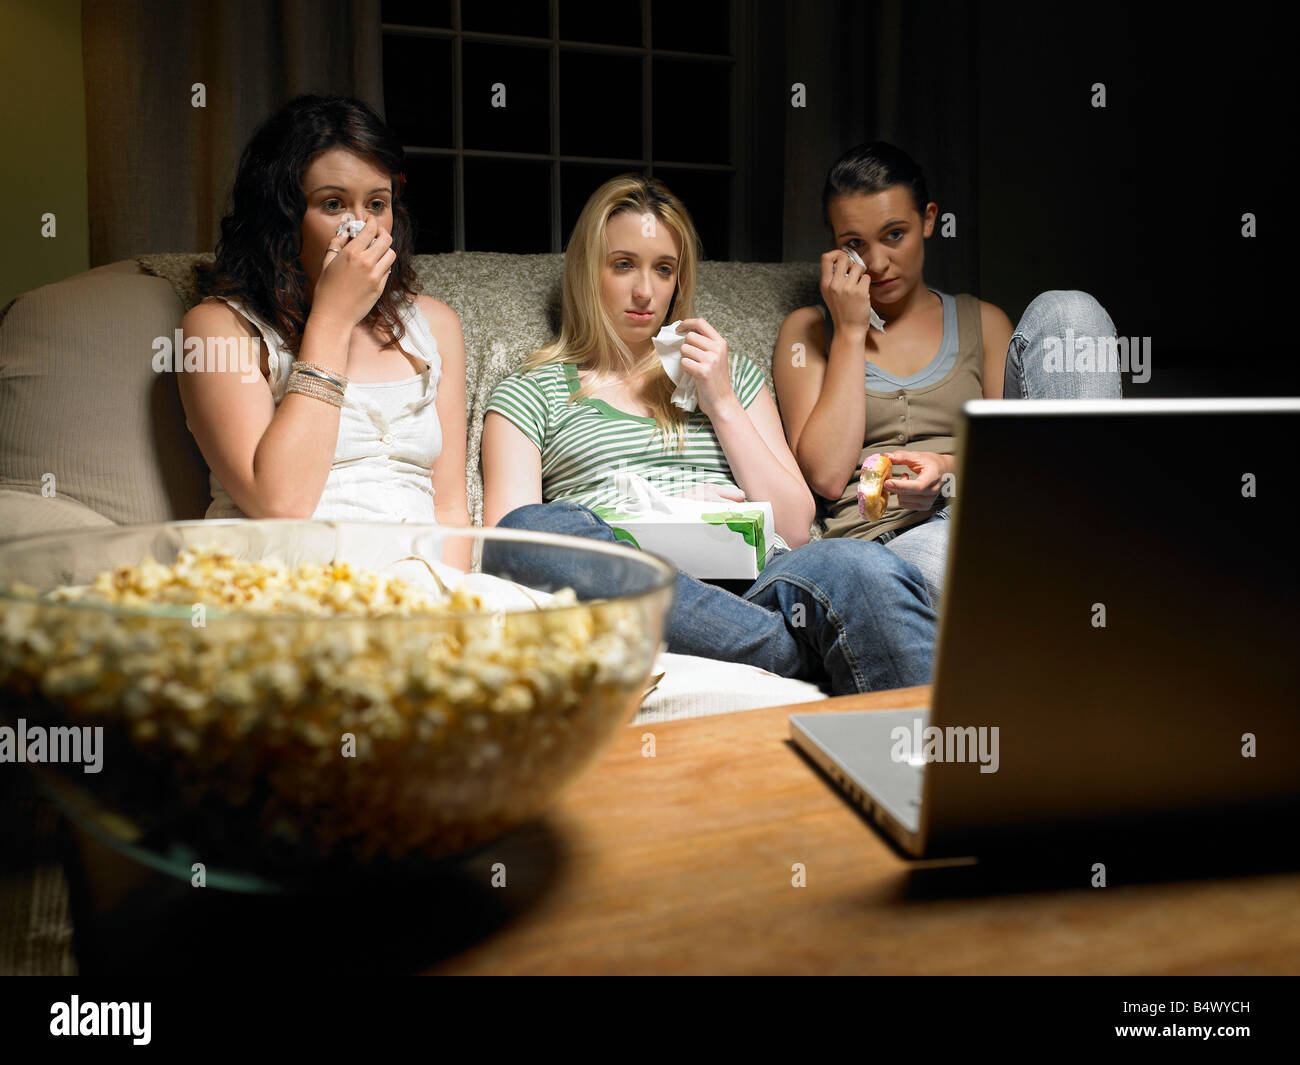 Three young women watching a movie Stock Photo